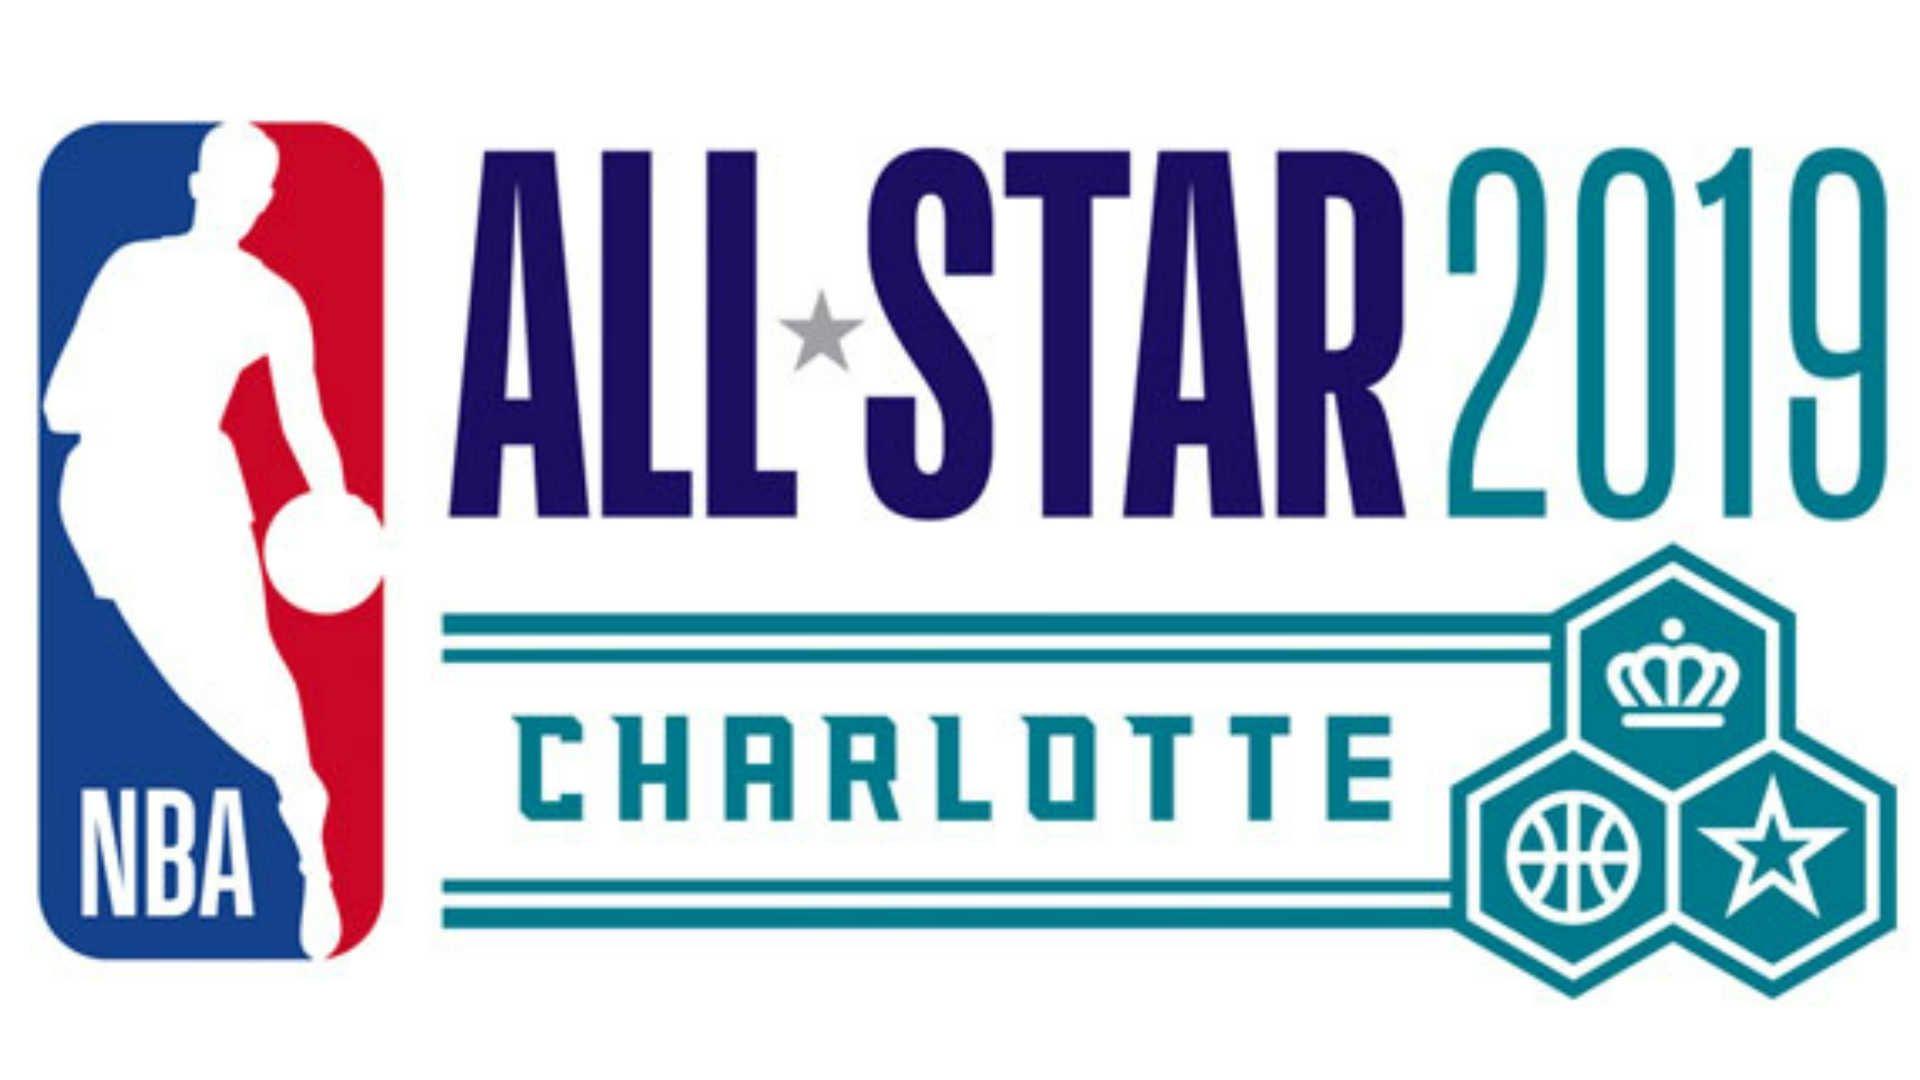 NBA All Star Game: Fan Voting Opens, Includes '2 For 1 Days